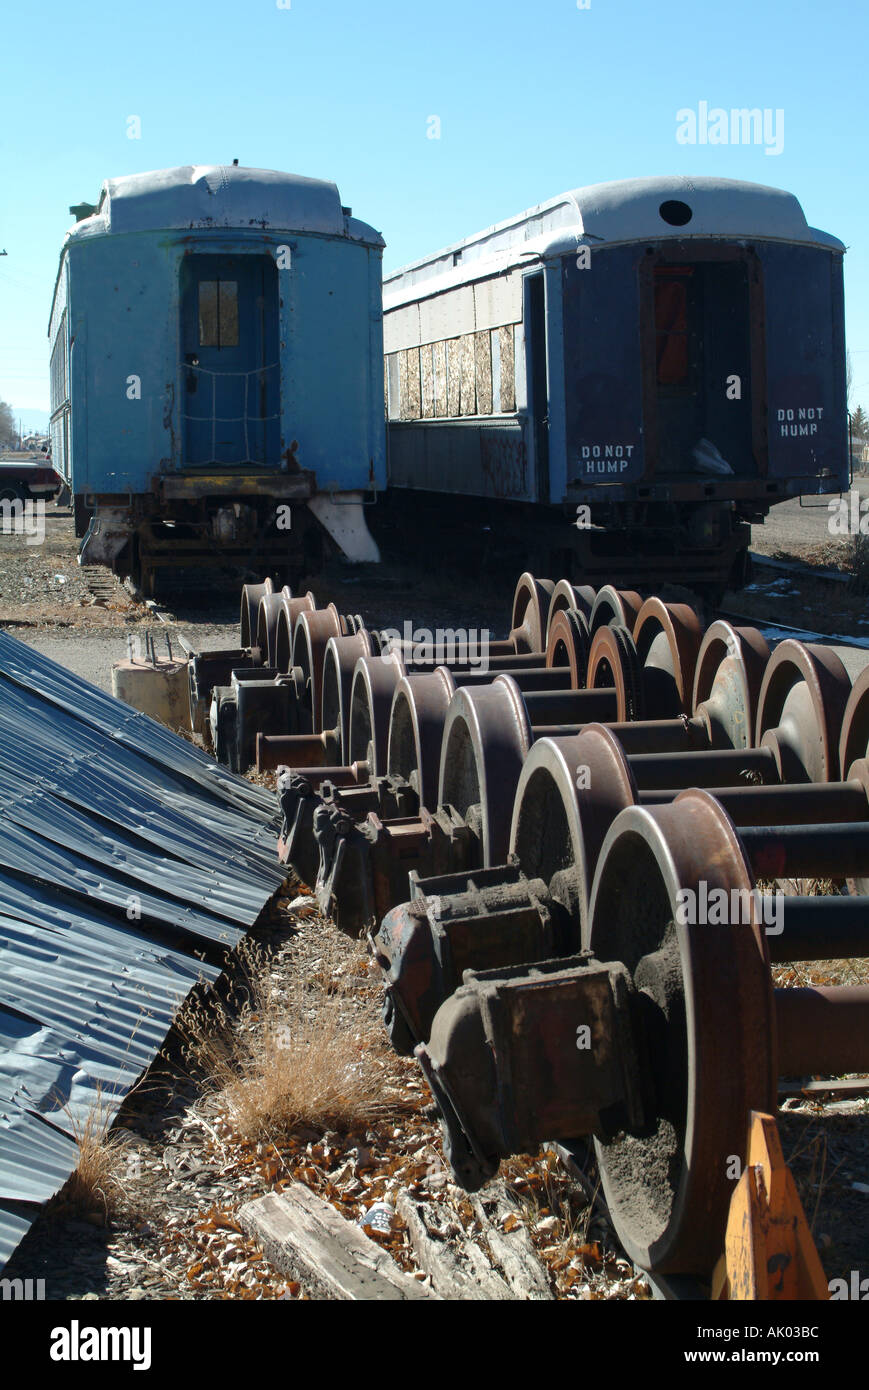 Old Railroad Carriages and Bogie Wheel Sets on Southern Santa Fe Railroad New Mexico United States America USA Stock Photo